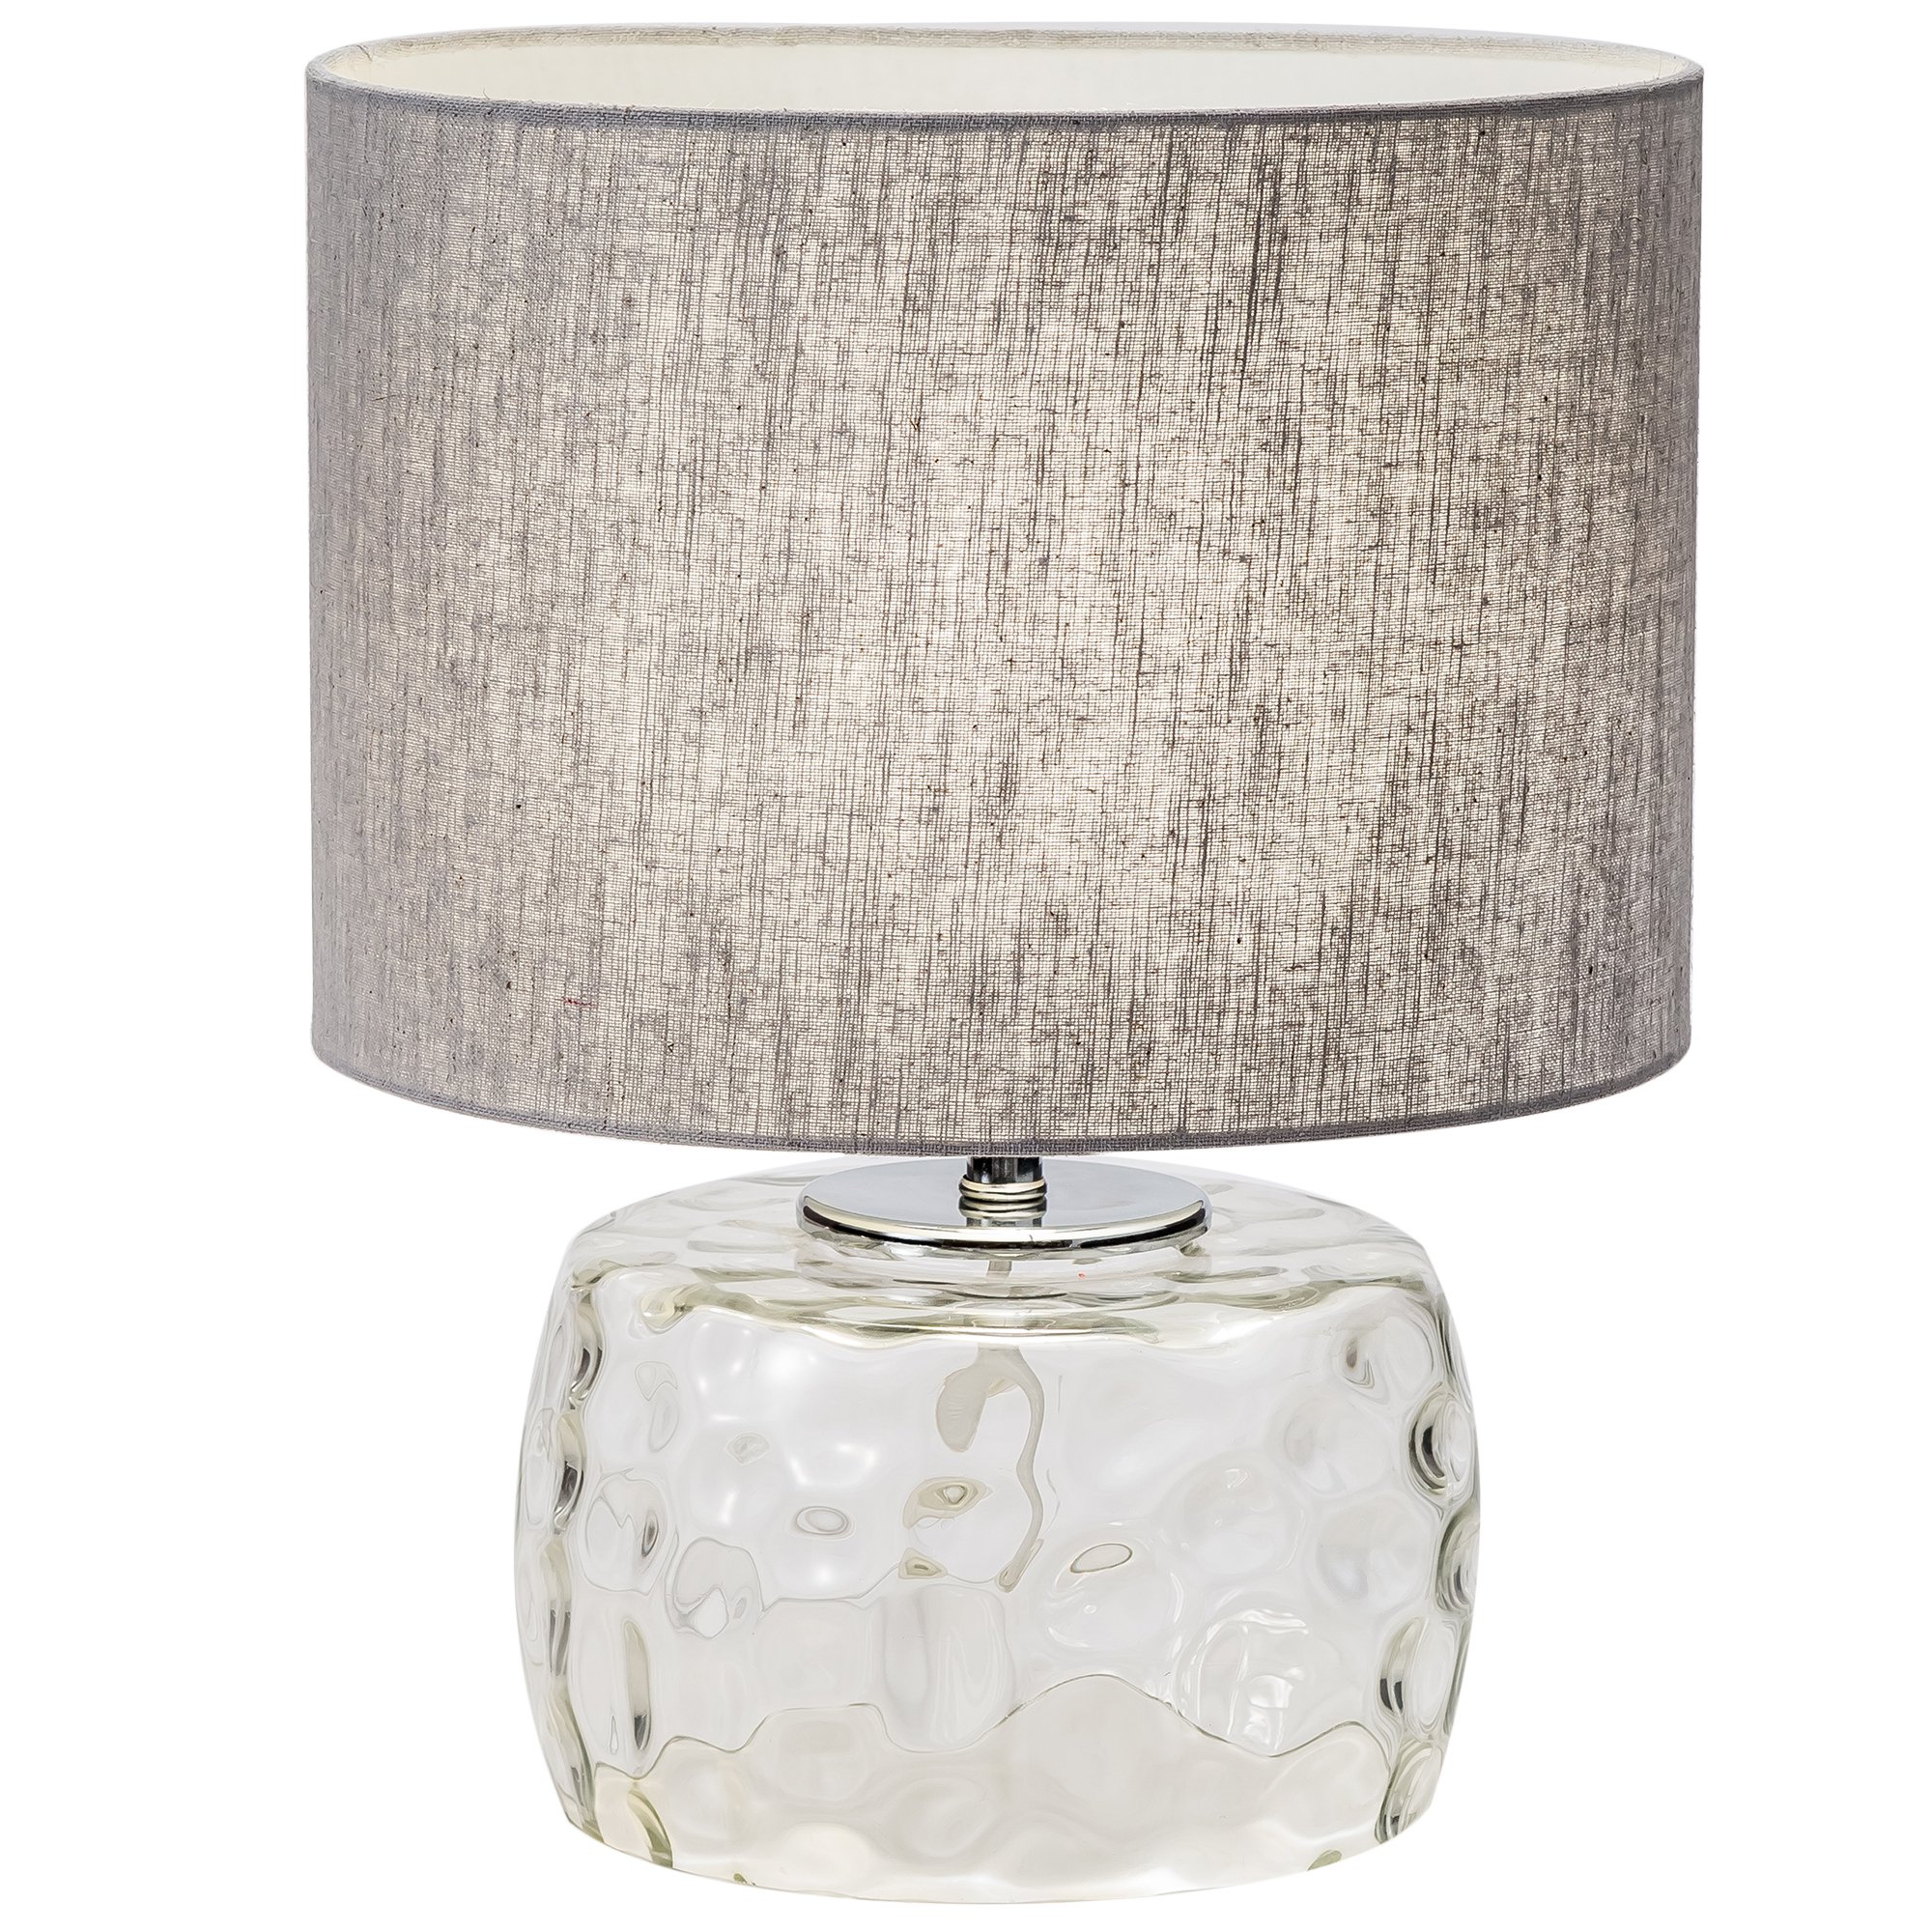 Glass Table Lamp - Temple And Webster - $99